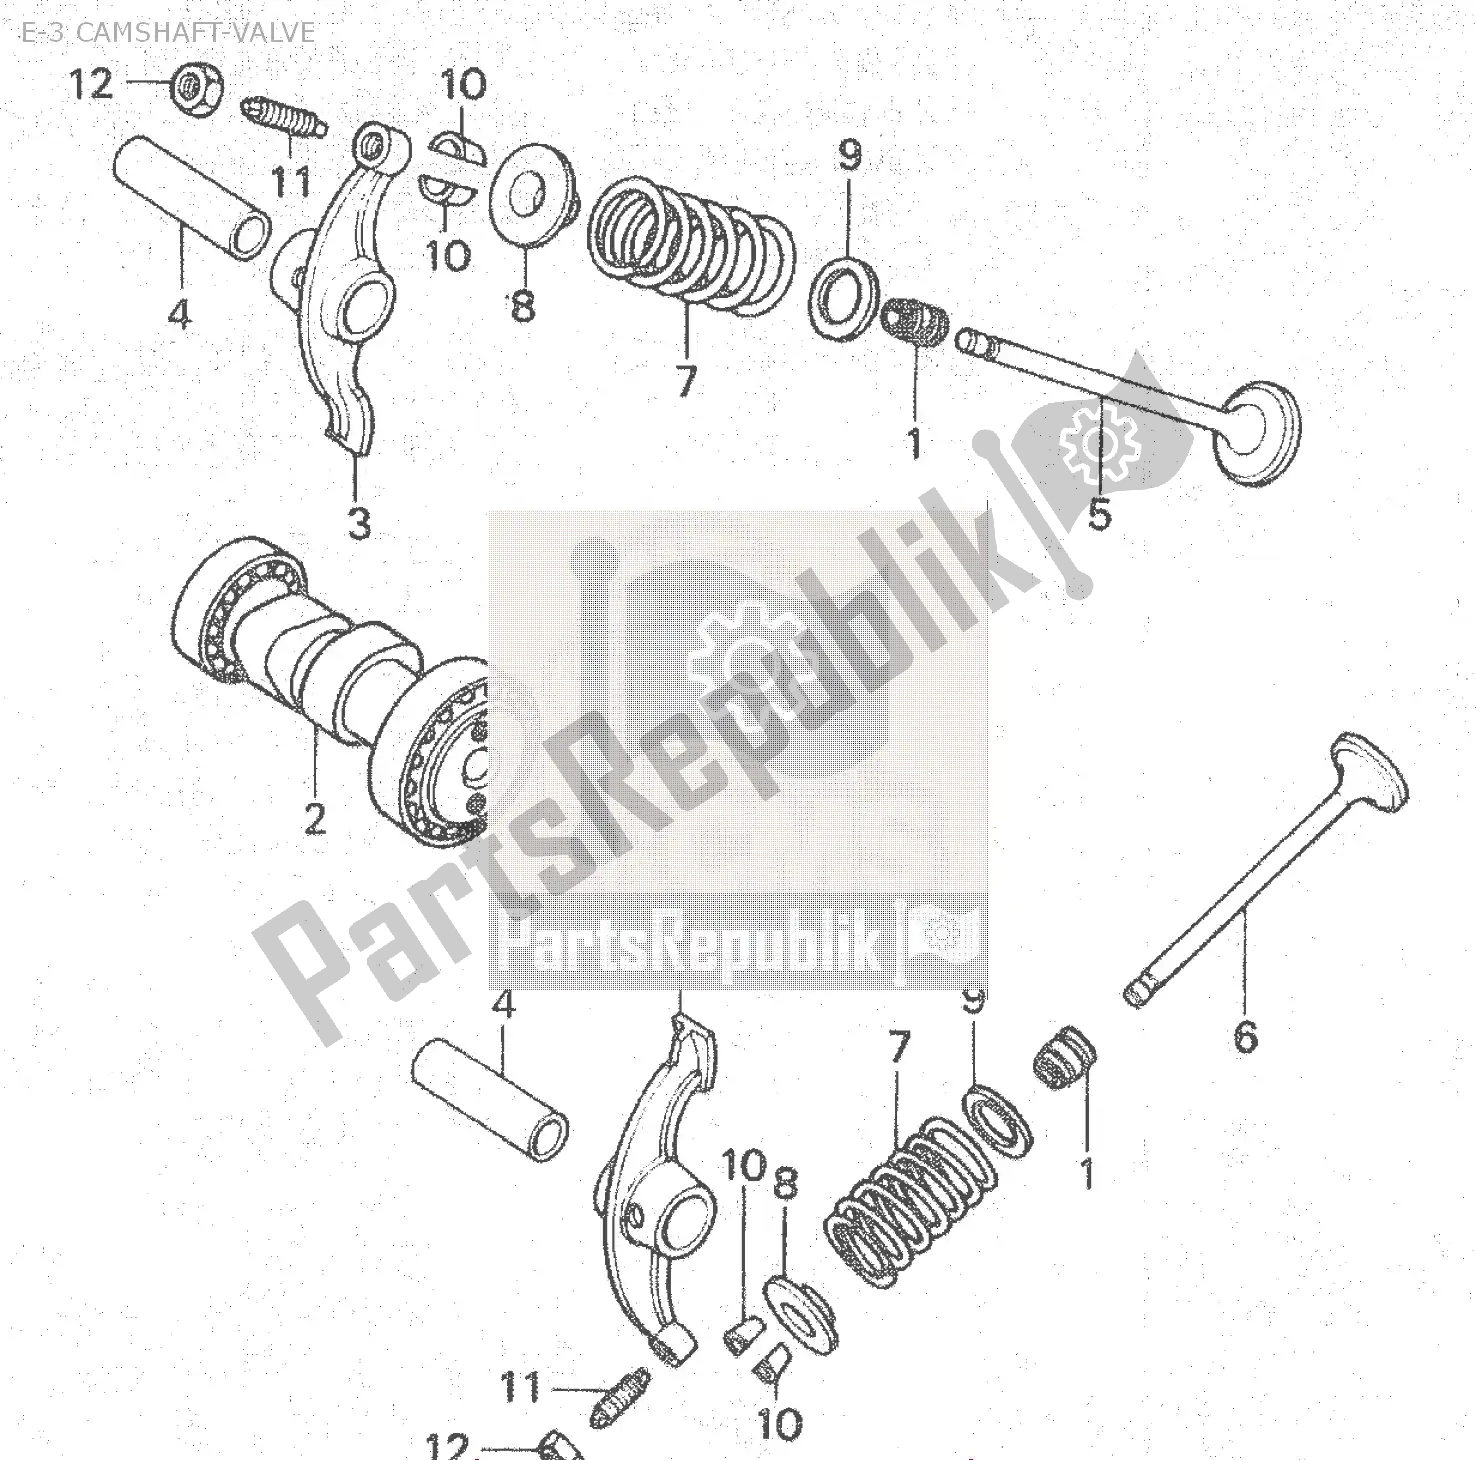 All parts for the E-3 Camshaft-valve of the Honda ZB 50 Monkey R 1988